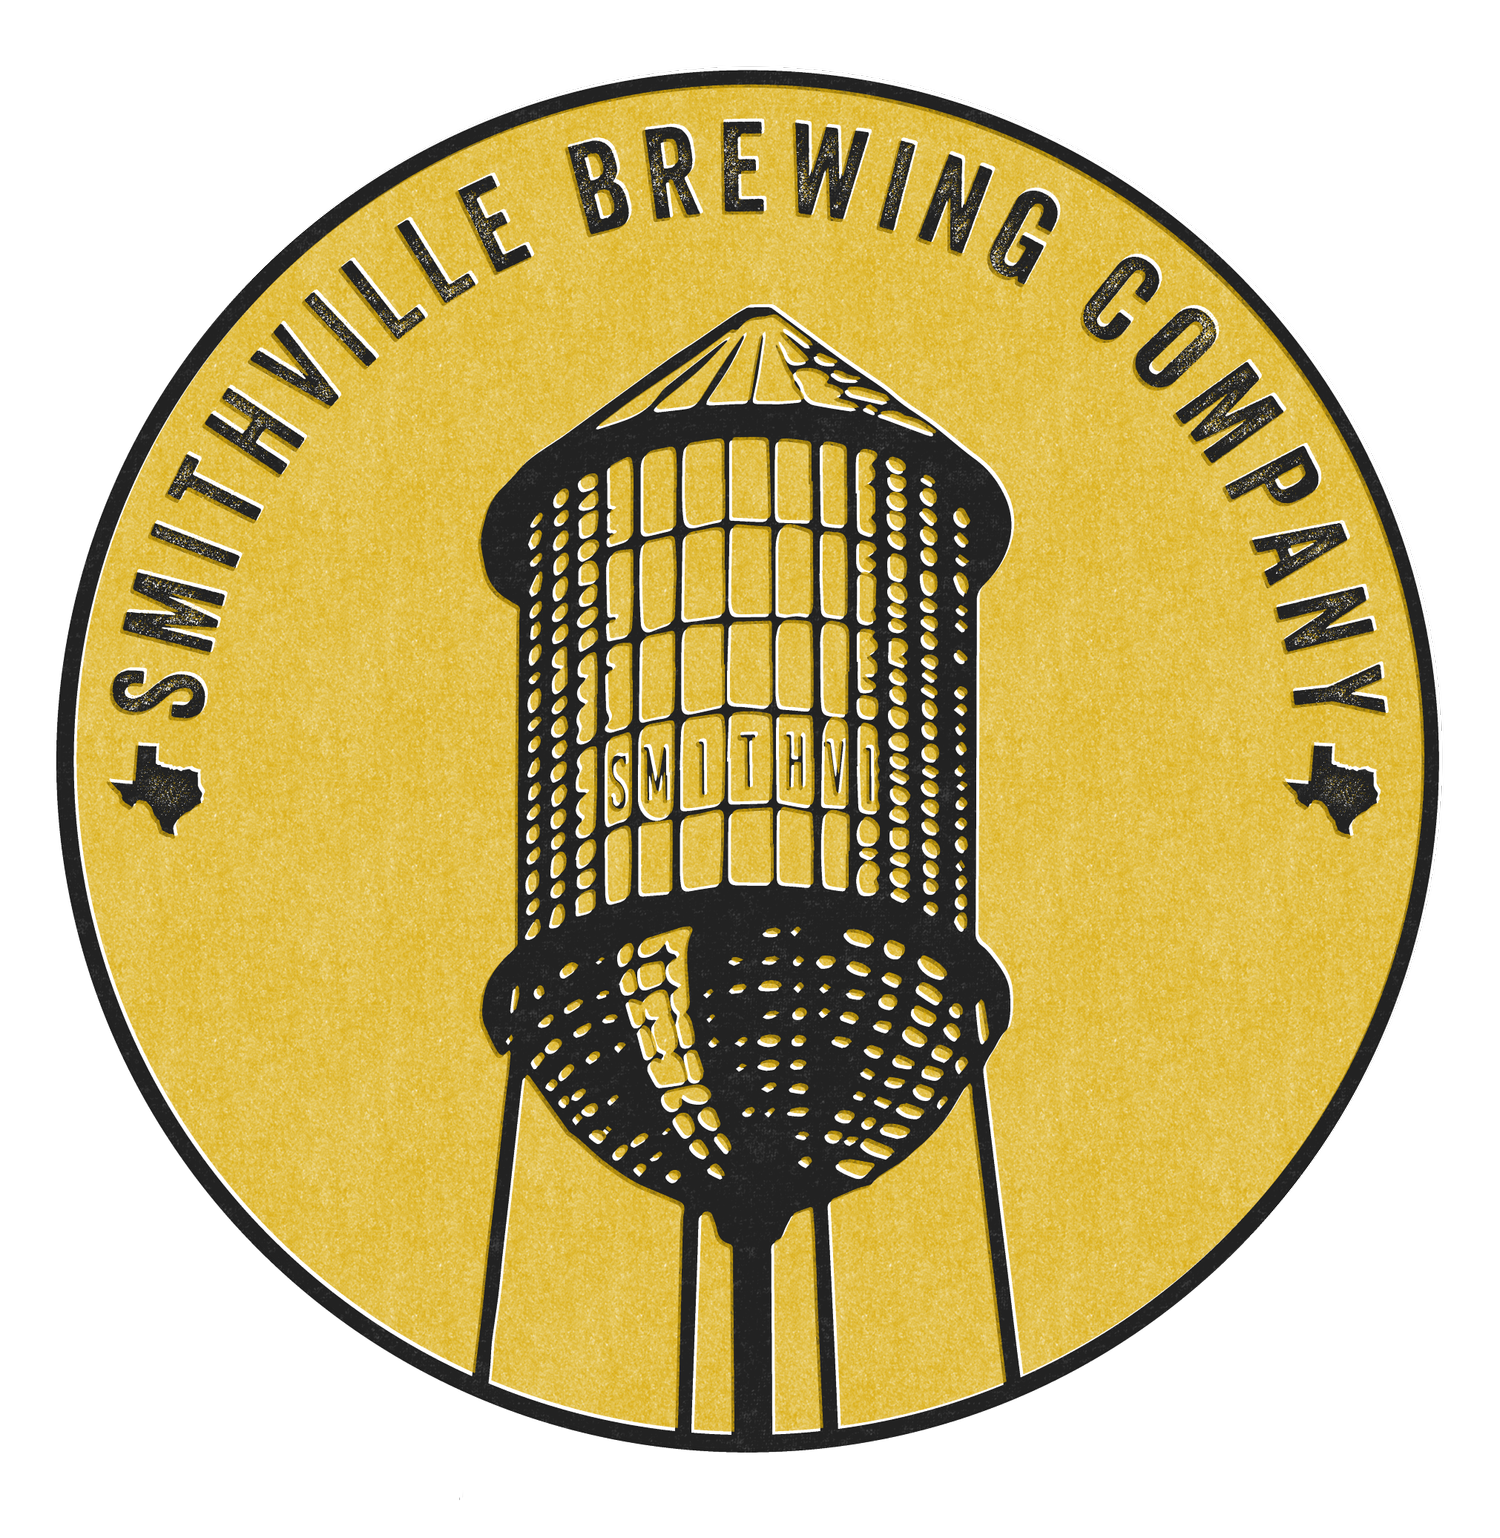 Smithville Brewing Company